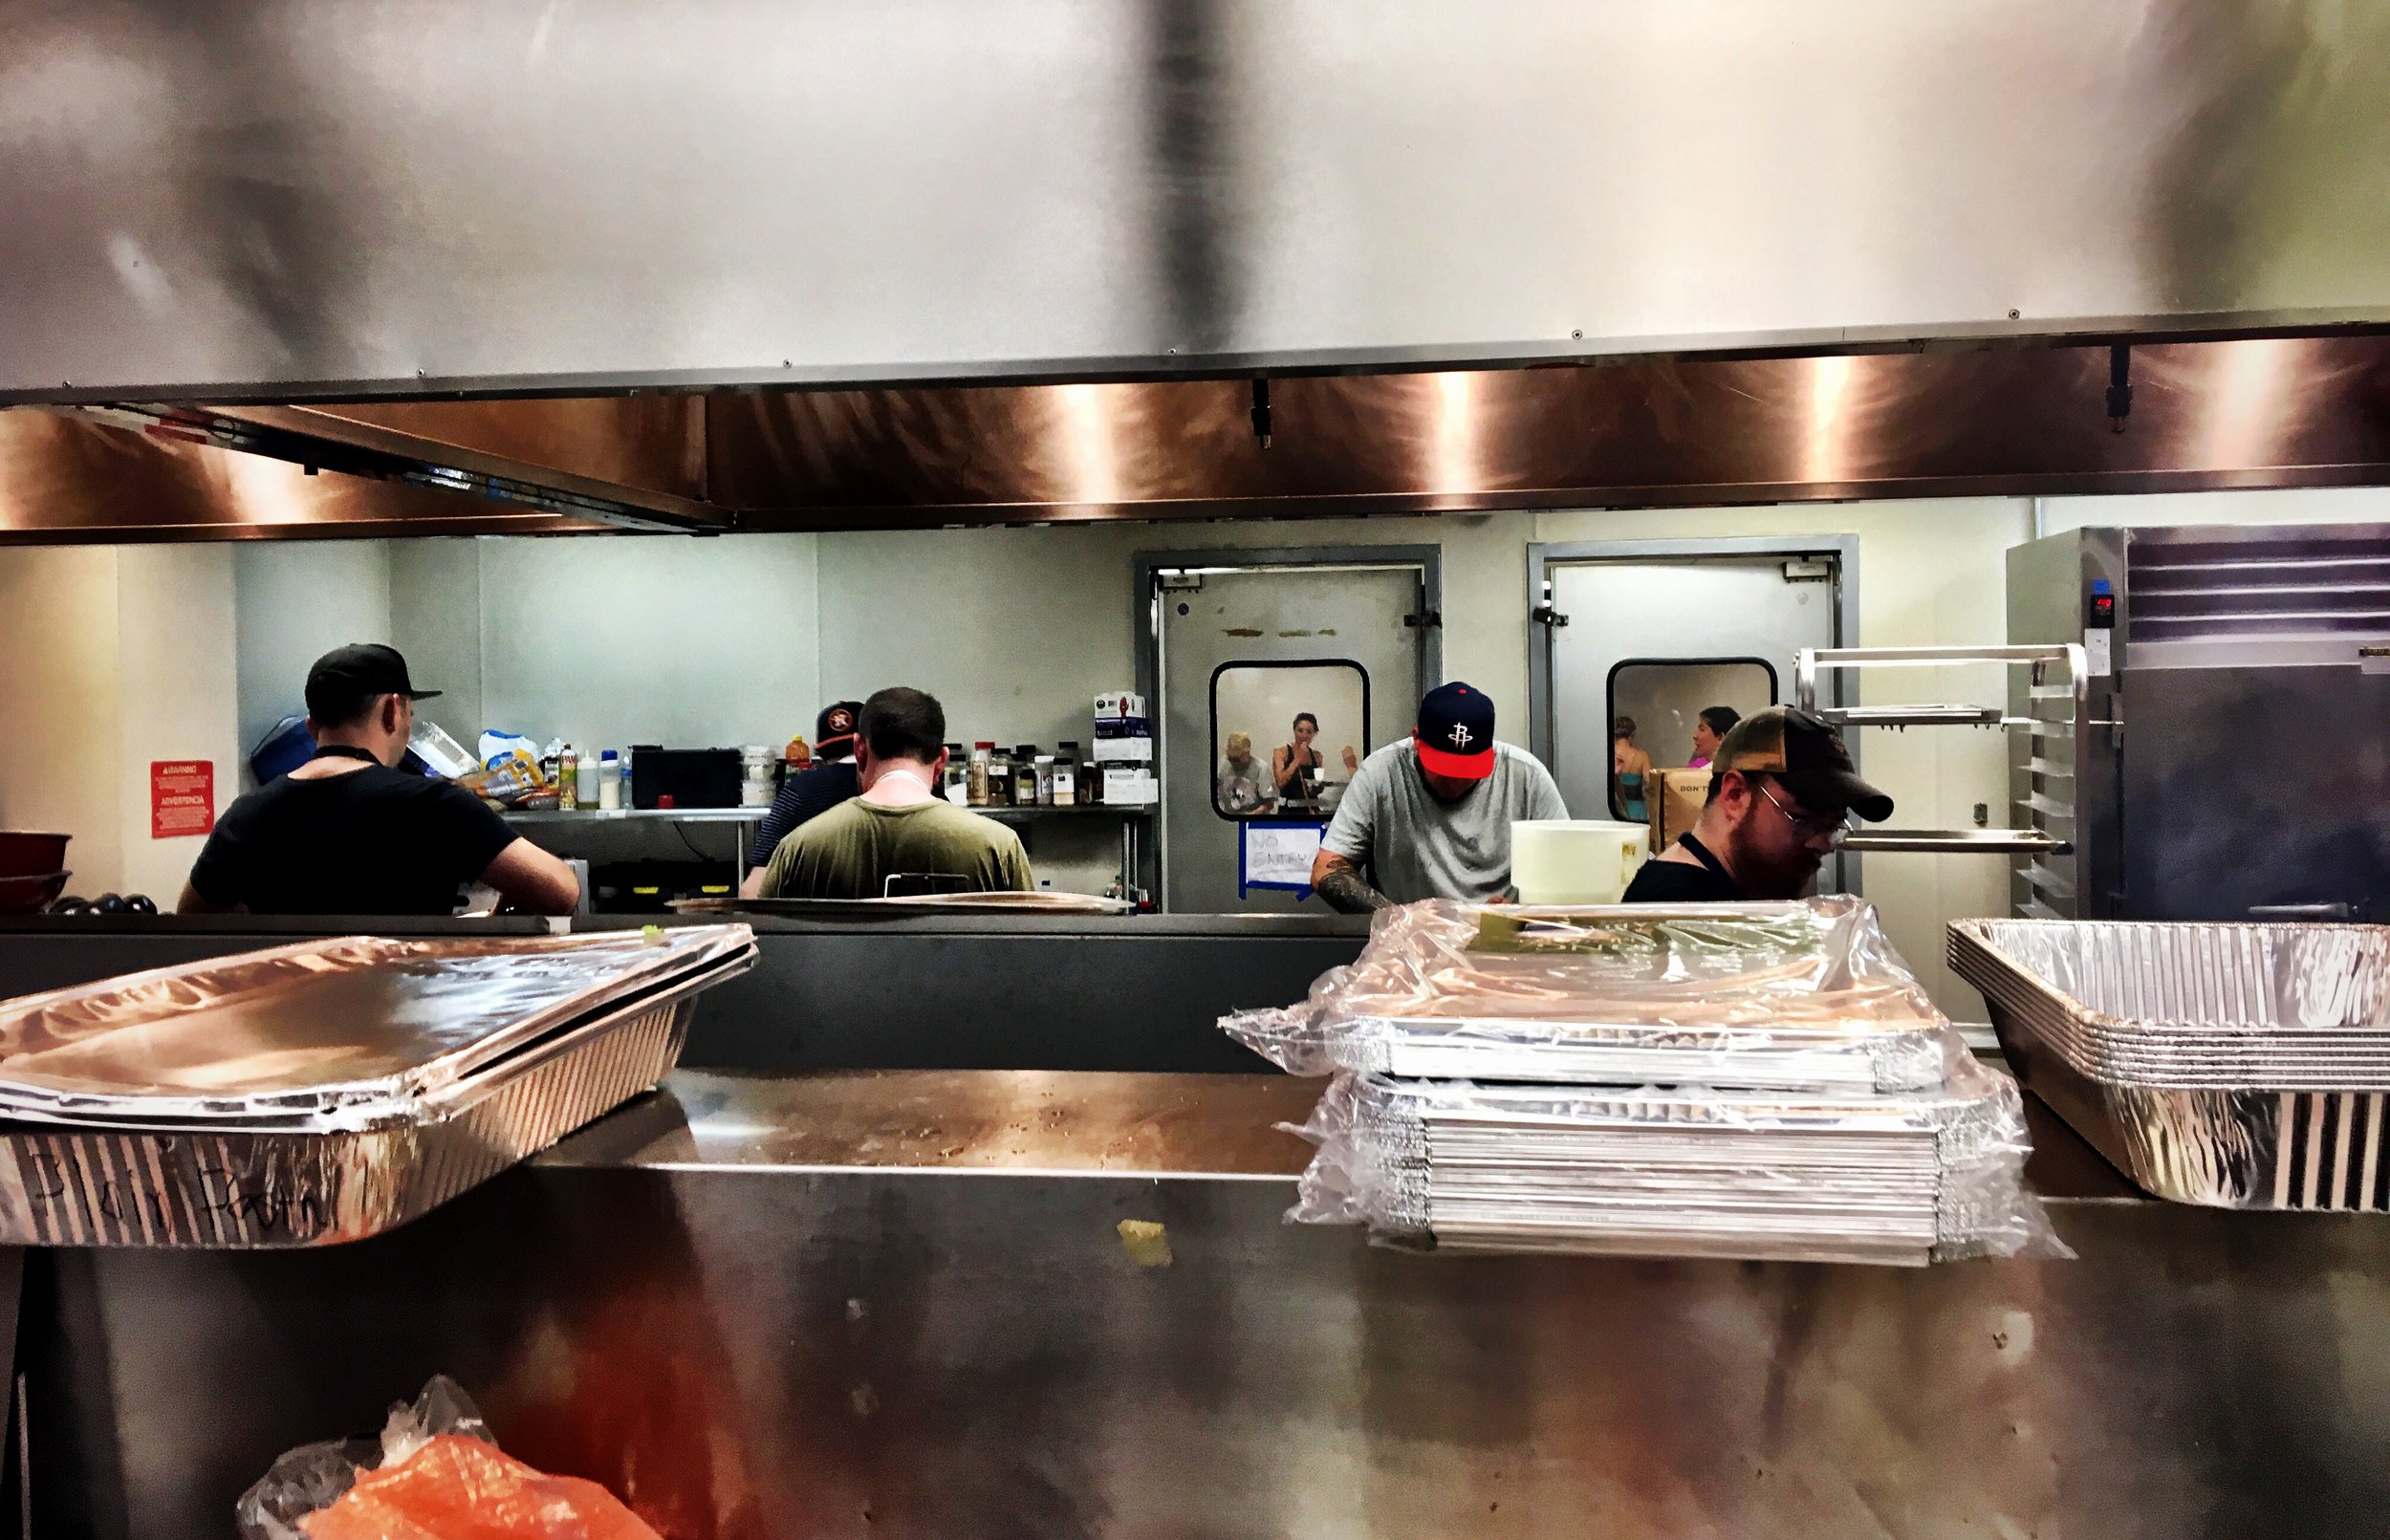 Part 3: How a Midtown shelter became a Harvey kitchen command center